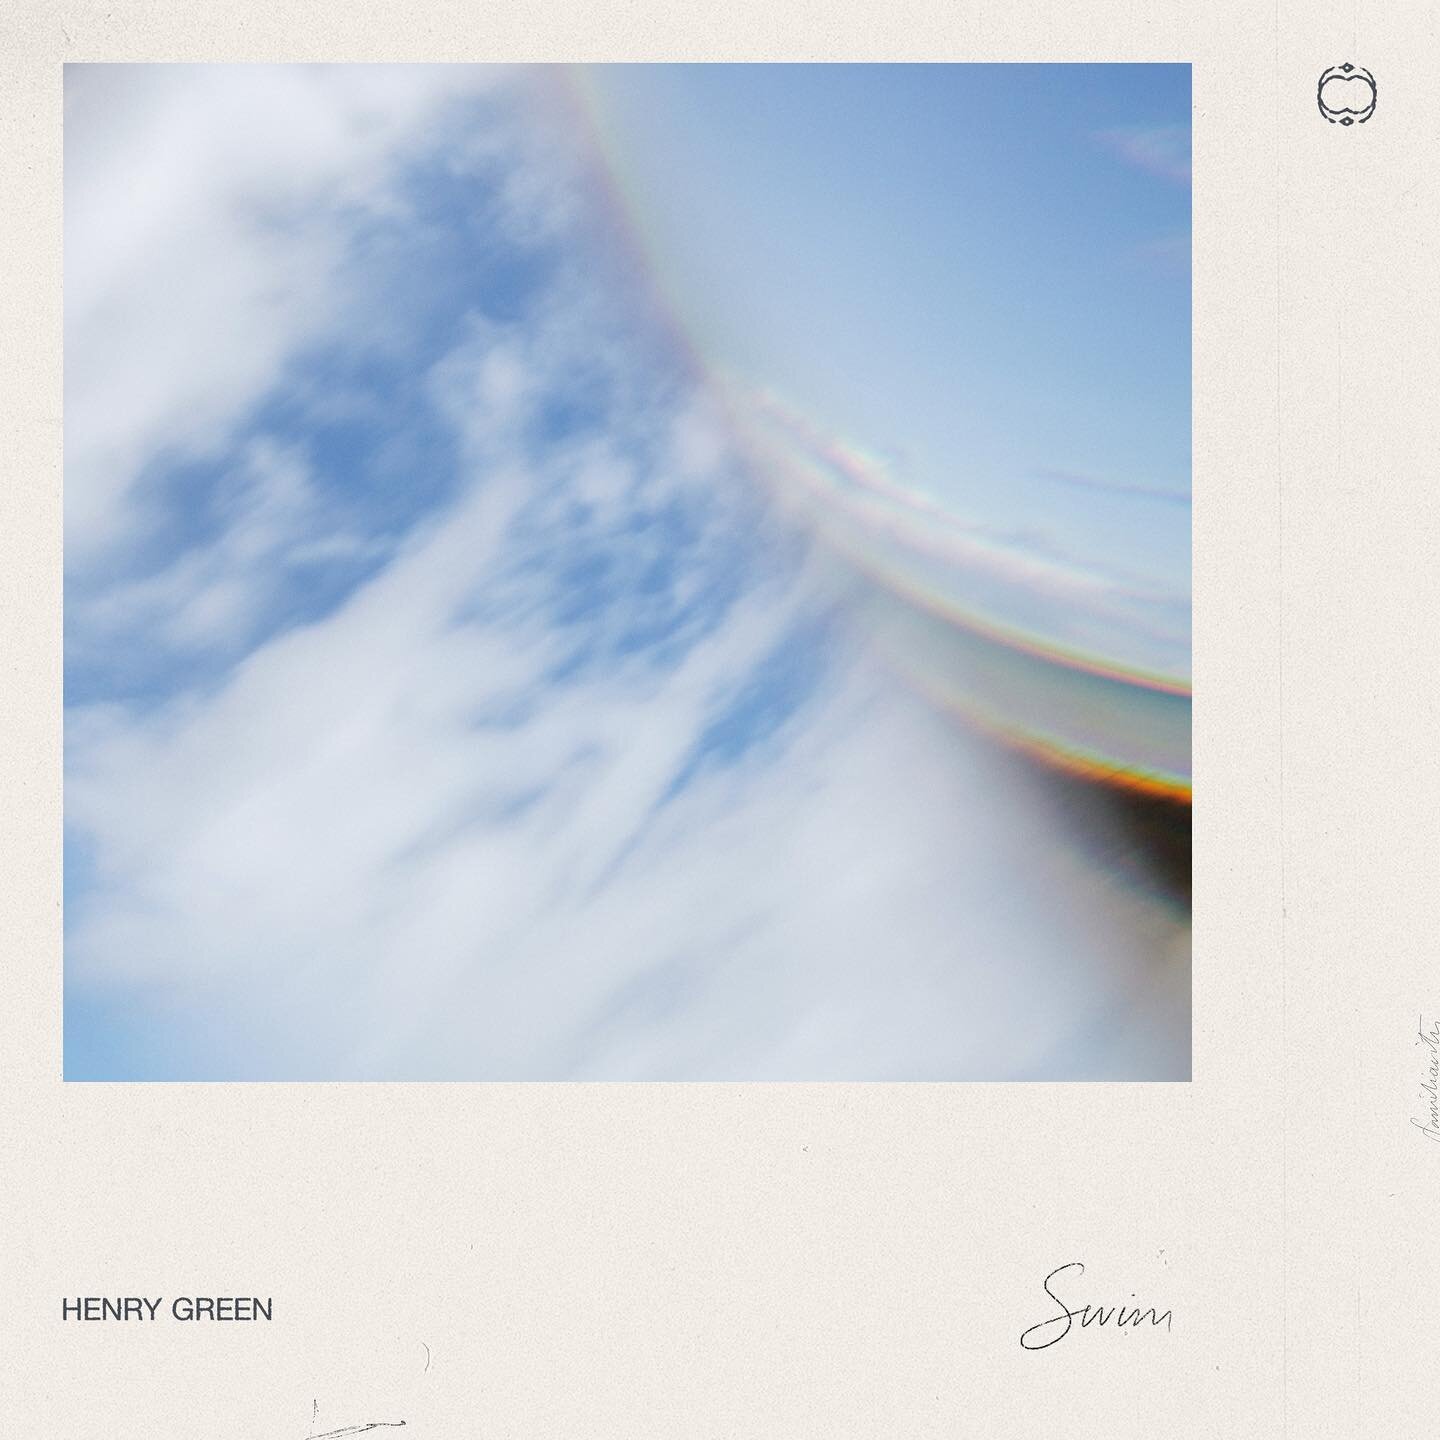 NEW MUSIC 🎶

Today, songwriter and producer, @henrygreenmusic releases his new single &lsquo;Swim&rsquo;, alongside a stunning music video which captures the song perfectly.

&lsquo;Swim&rsquo; is the fourth single from Henry&rsquo;s upcoming third 